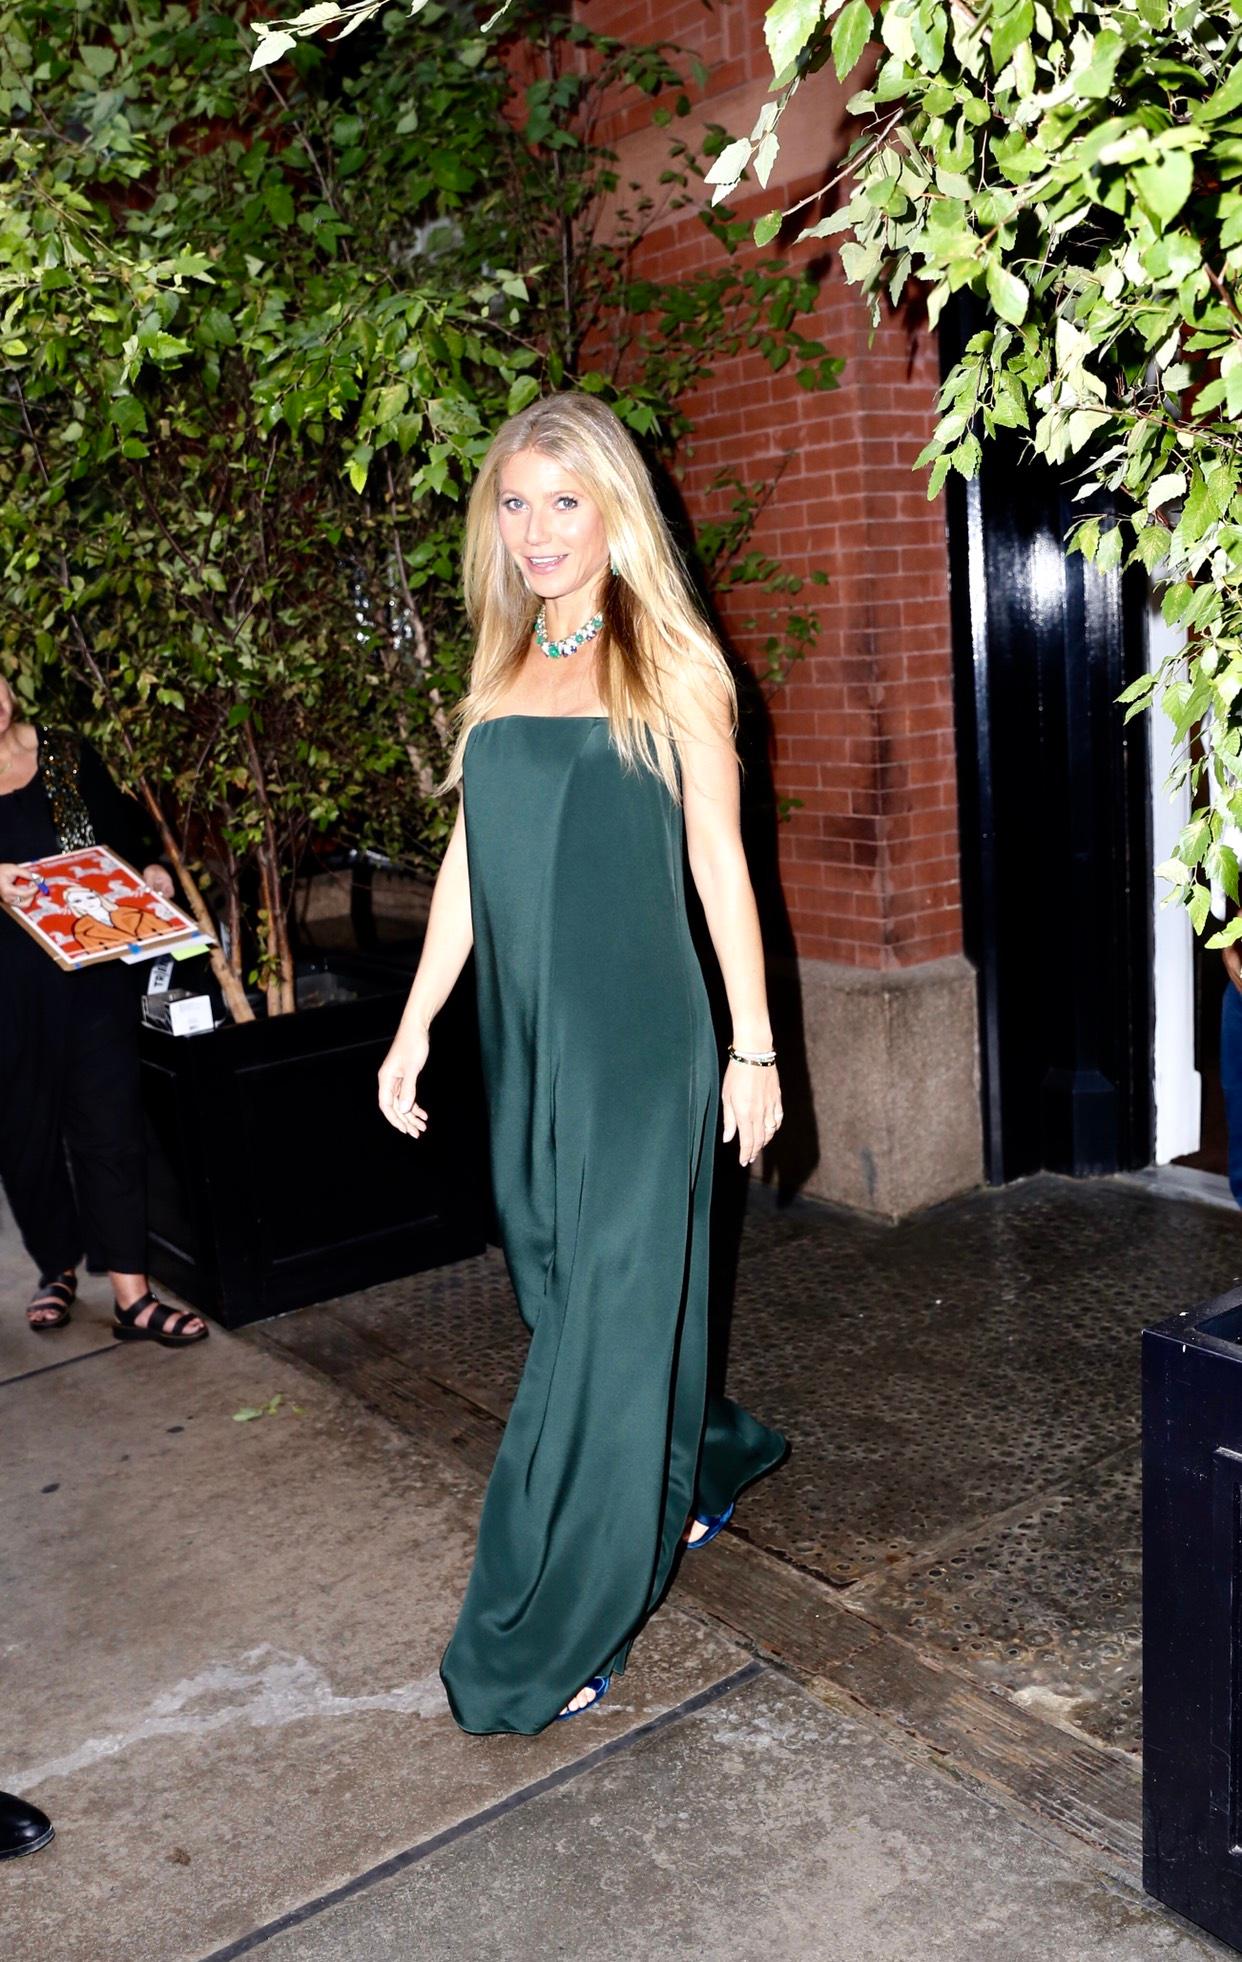 Gwyneth Paltrow is seen on the street in New York City